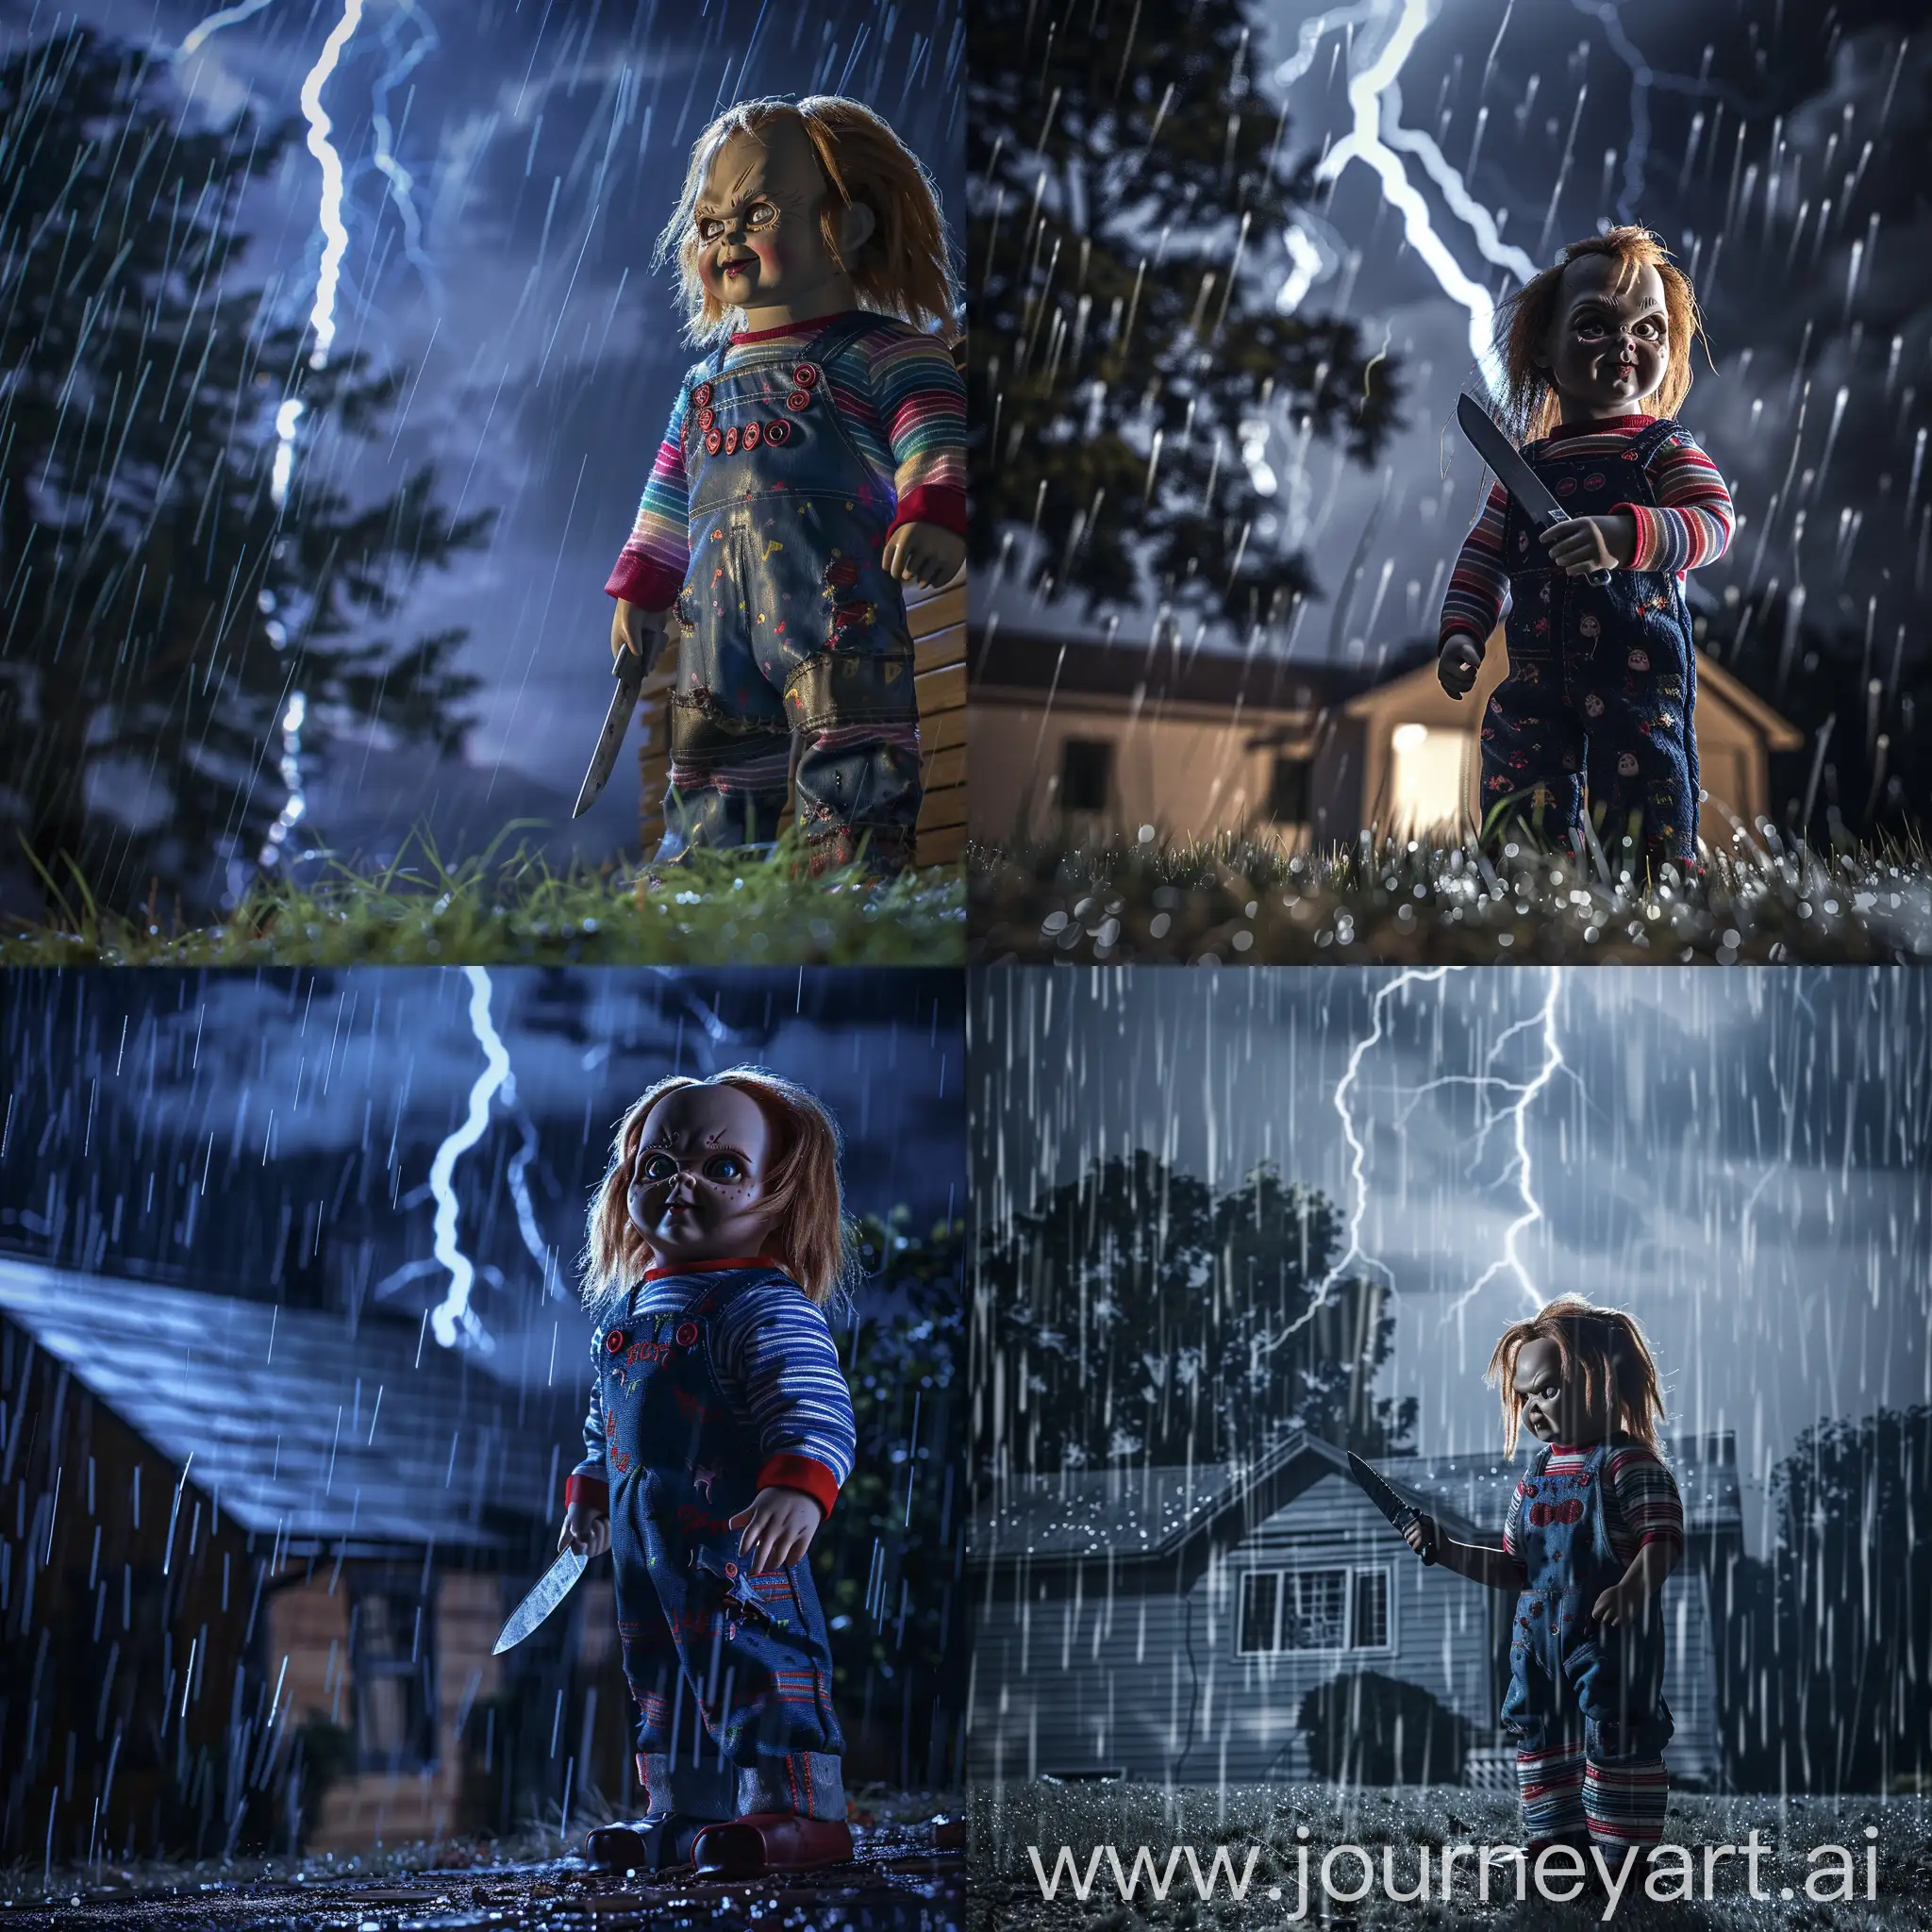 Sinister-Chucky-in-Midnight-Rainstorm-with-Knife